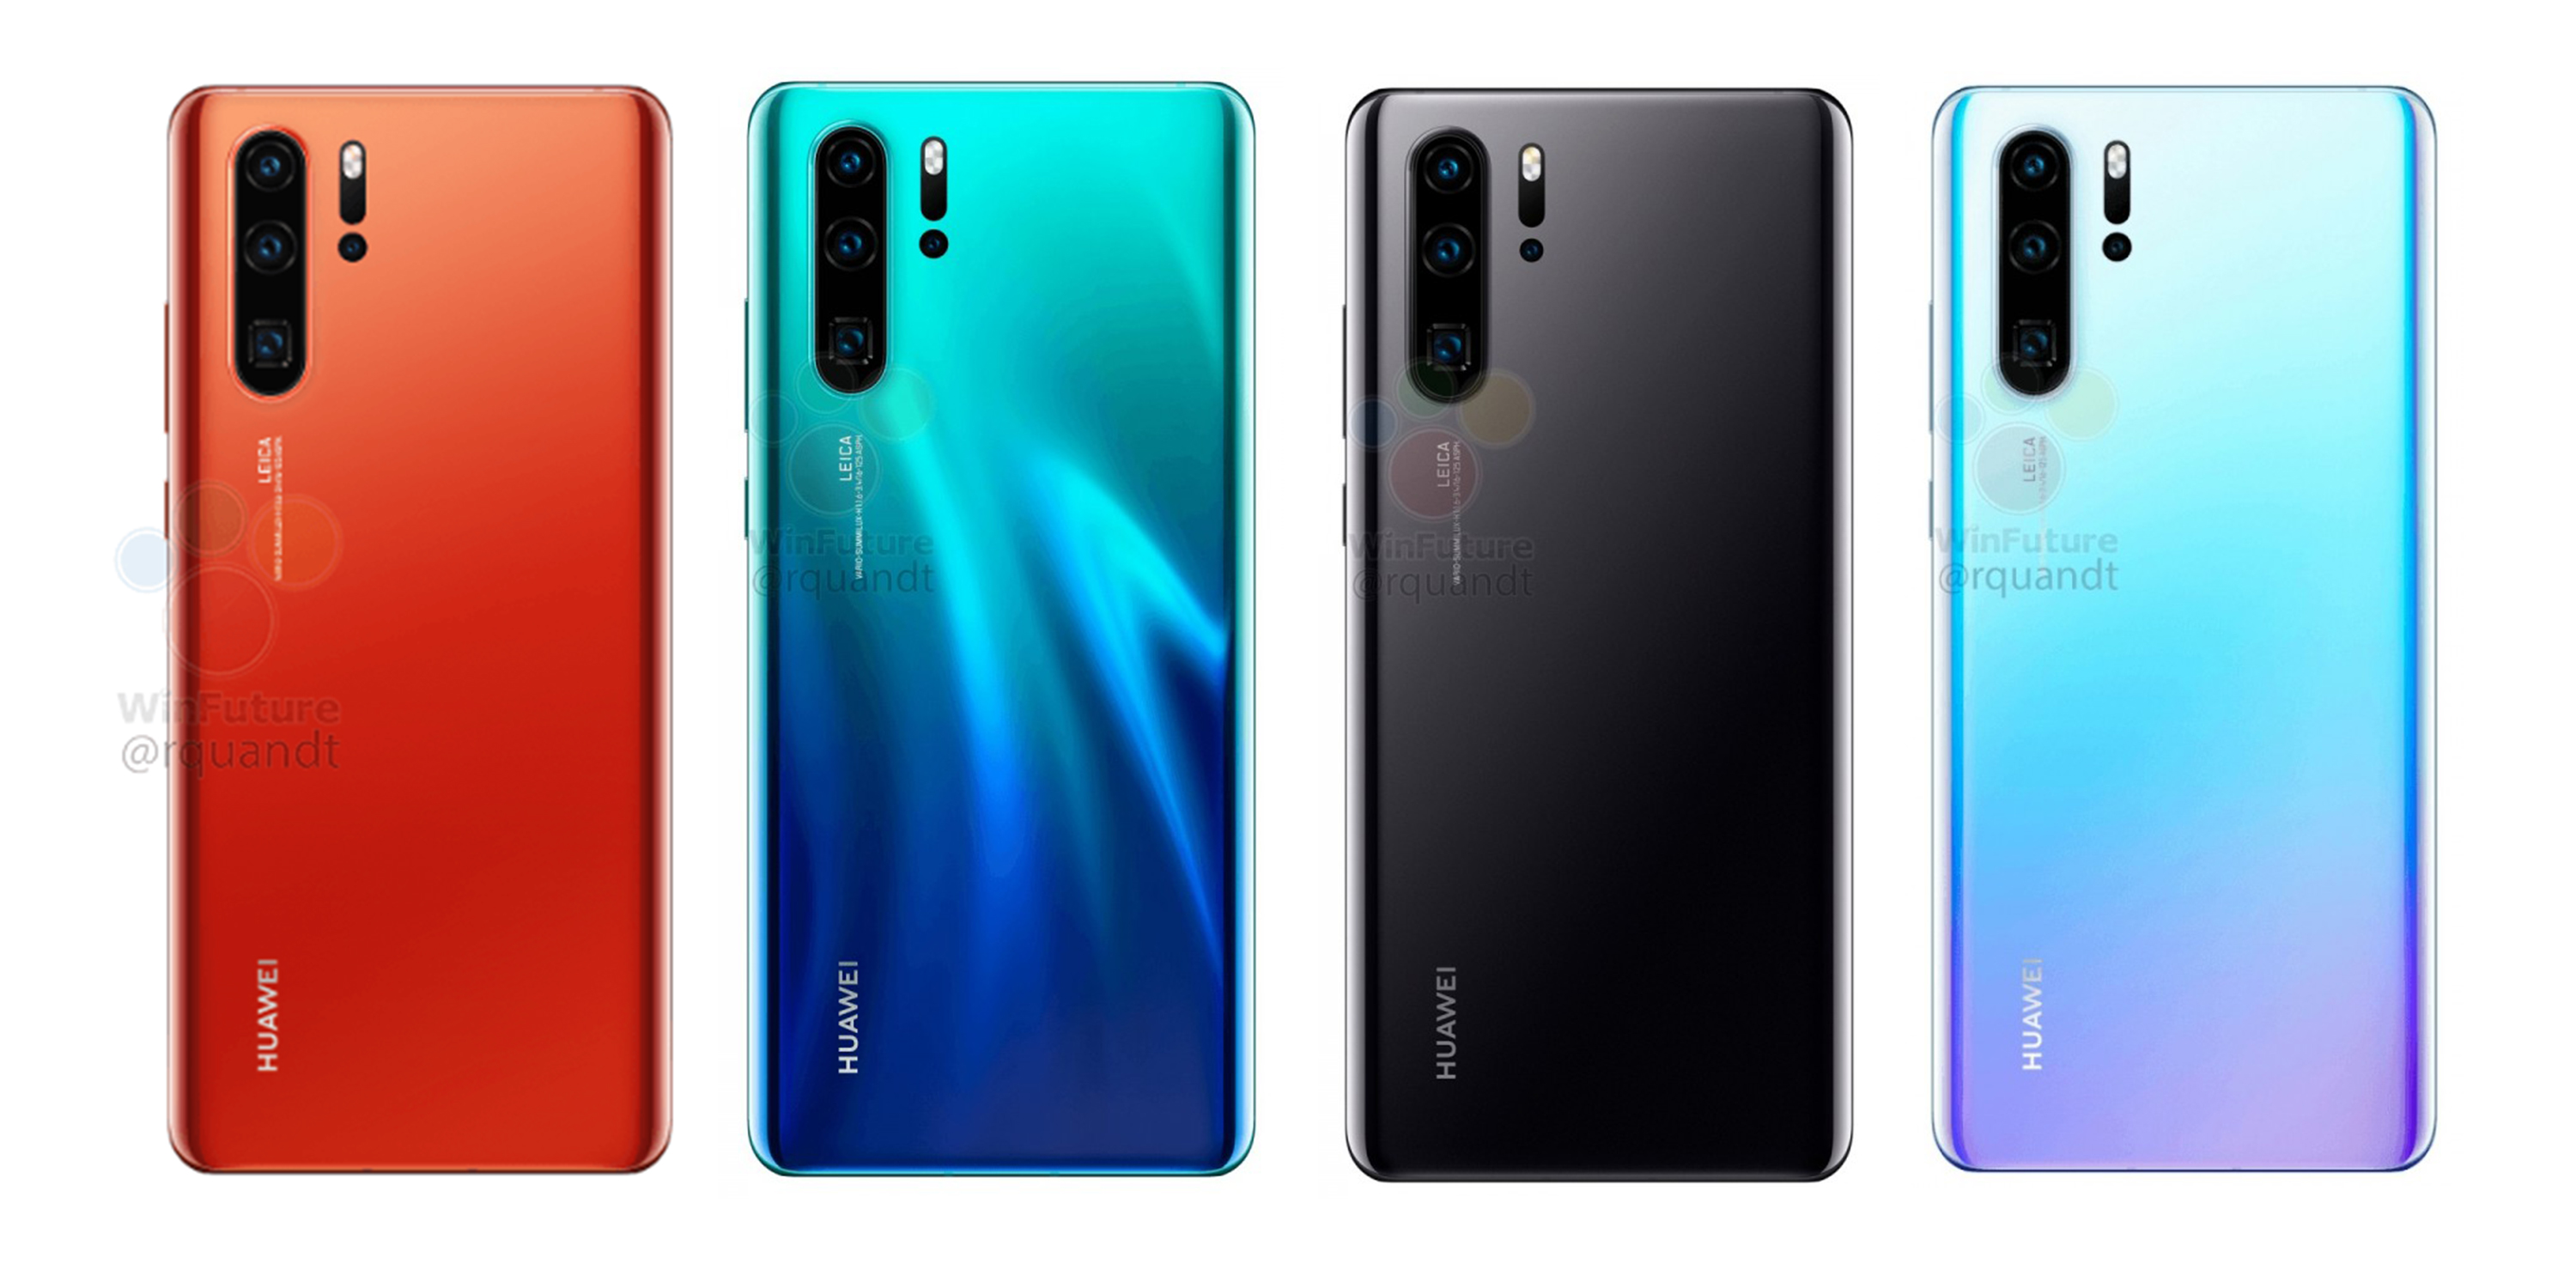 Huawei P30 And P30 Pro Full Specs Leak Giving Us An Even Bigger Picture W New Colors 9to5google